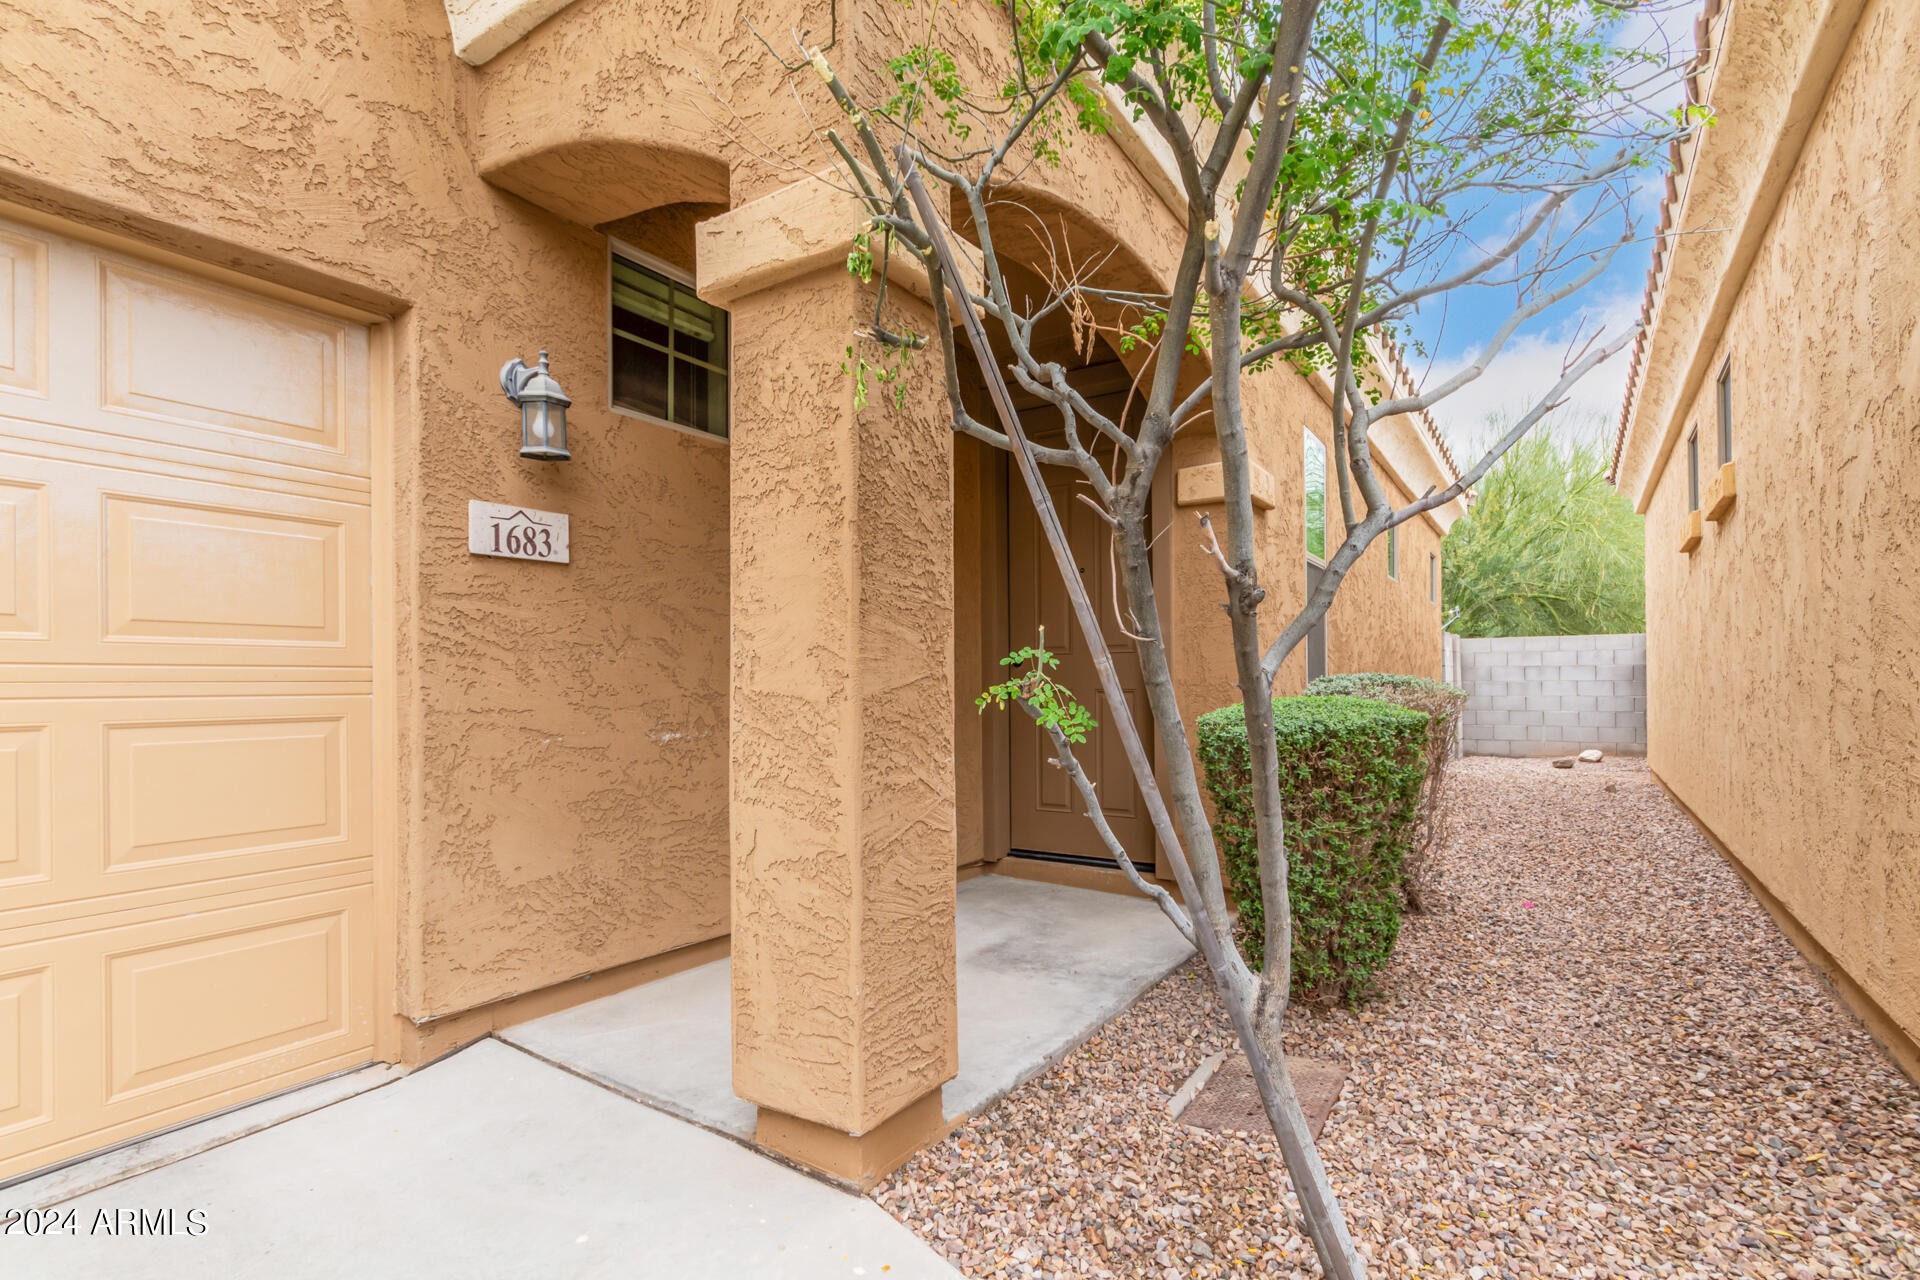 2. 1683 S Desert View Place